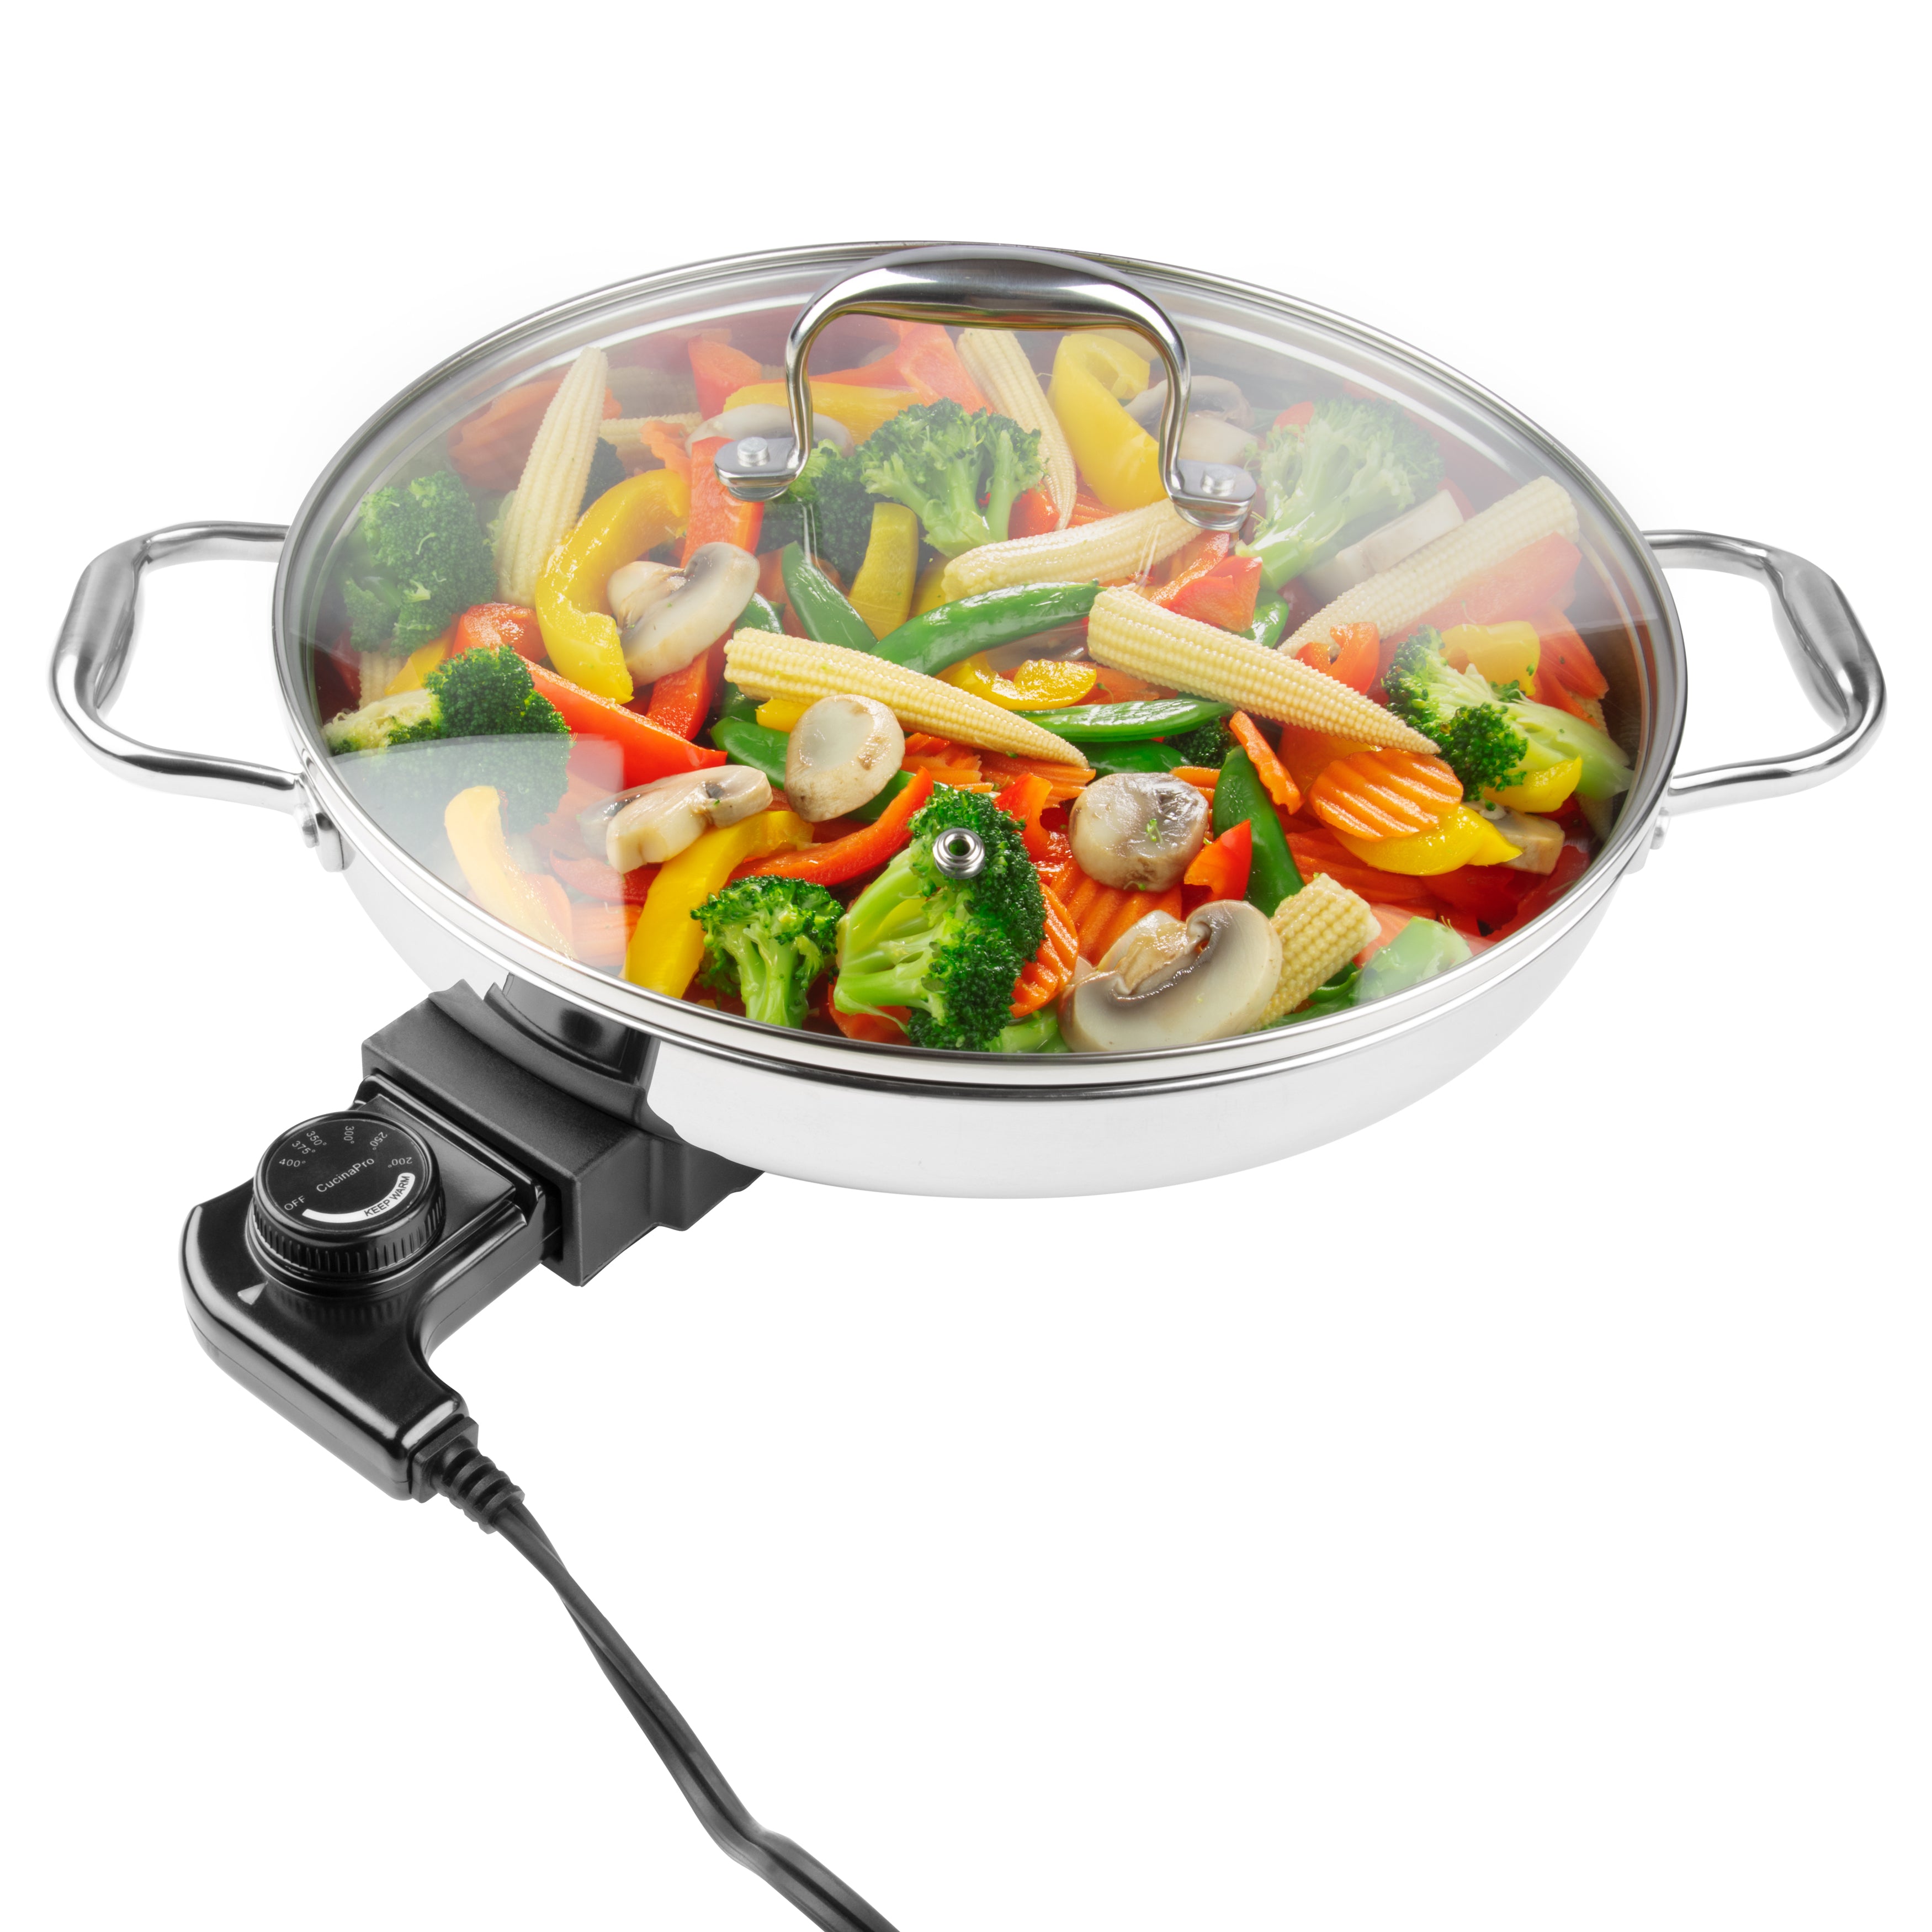 Electric Skillet By Cucina Pro - 18/10 Stainless Steel with